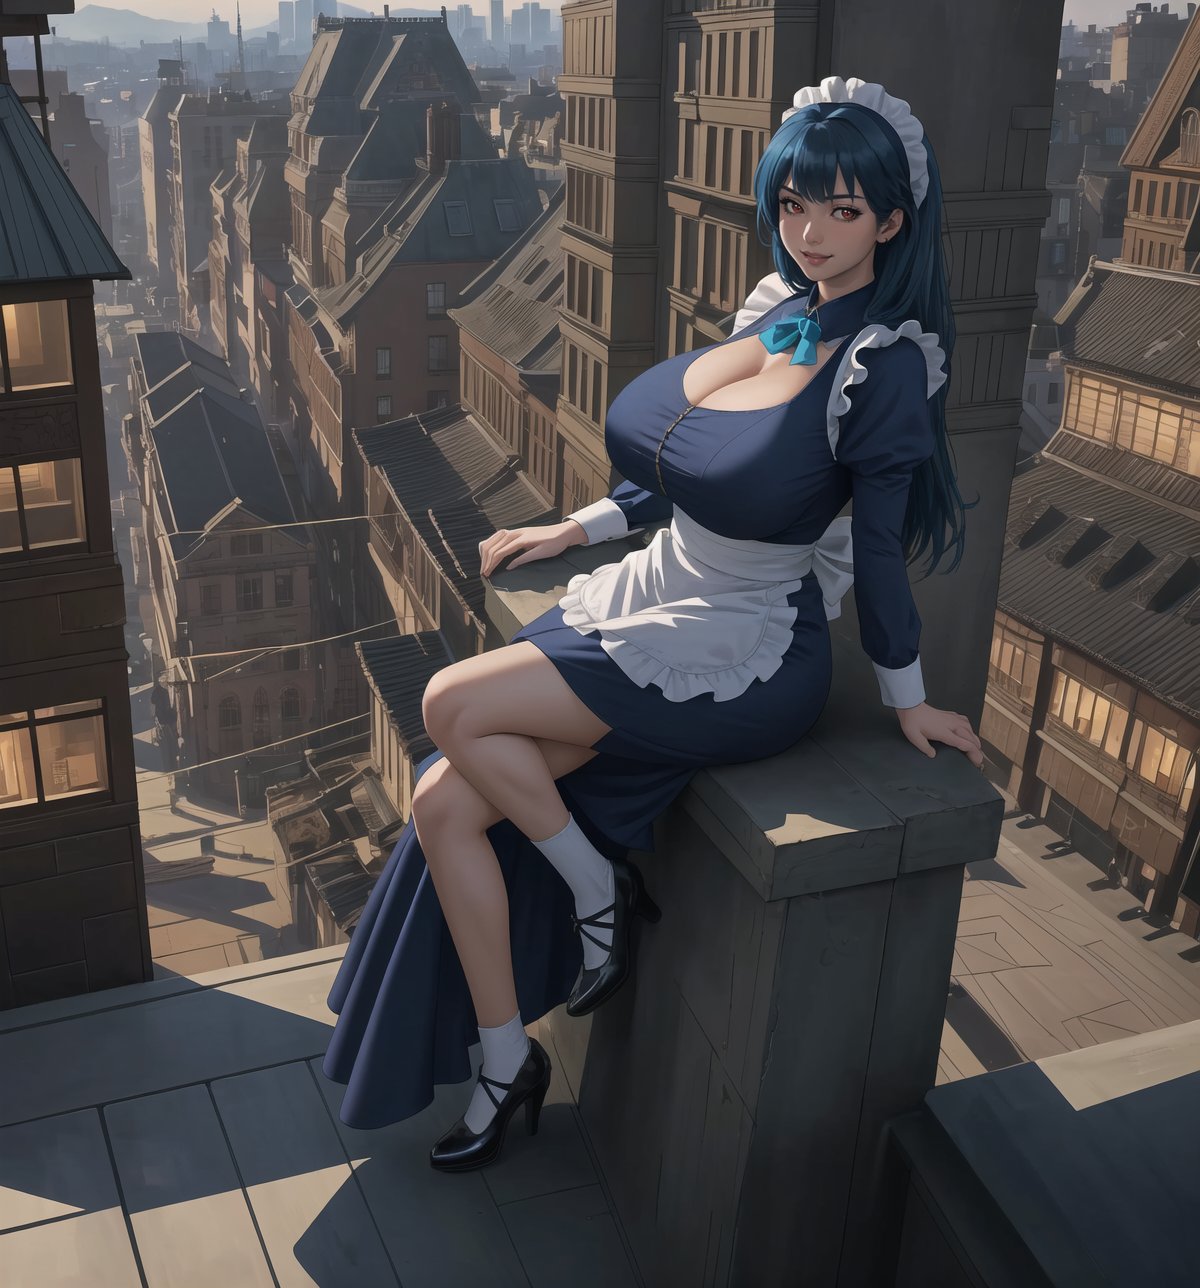 A masterpiece of urban art with a realistic style and graphic details. | Miyuki, a 23-year-old woman, is dressed in a maid's outfit, consisting of a blue dress with a white apron, white stockings, and black low-heeled shoes. She also wears a white headscarf, which gives her an air of innocence and purity. Her blue hair is long and straight, with a modern and stylish cut. Her red eyes are looking at the viewer, smiling and showing her white teeth. She is on a building balcony, overlooking the bustling city below. | The image highlights Miyuki's imposing figure and the architectural elements of the balcony and the building. The concrete and glass structures, along with Miyuki, create an urban and seductive atmosphere. The artificial lighting of the city illuminates the scene, creating dramatic shadows and emphasizing the details of the scene. | Soft and dark lighting effects create a relaxing and mysterious atmosphere, while rough and detailed textures on the structures and outfit add realism to the image. | A relaxing and attractive scene of a beautiful woman on a building balcony, combining elements of urban art and modern architecture. | (((((The image reveals a full-body shot as she assumes a sensual pose, engagingly leaning against a structure within the scene in an exciting manner. She takes on a sensual pose as she interacts, boldly leaning on a structure, leaning back in an exciting way.))))). | ((full-body shot)), ((perfect pose)), ((perfect fingers, better hands, perfect hands)), ((perfect legs, perfect feet)), ((huge breasts, big natural breasts, sagging breasts)), ((perfect design)), ((perfect composition)), ((very detailed scene, very detailed background, perfect layout, correct imperfections)), More Detail, Enhance, 